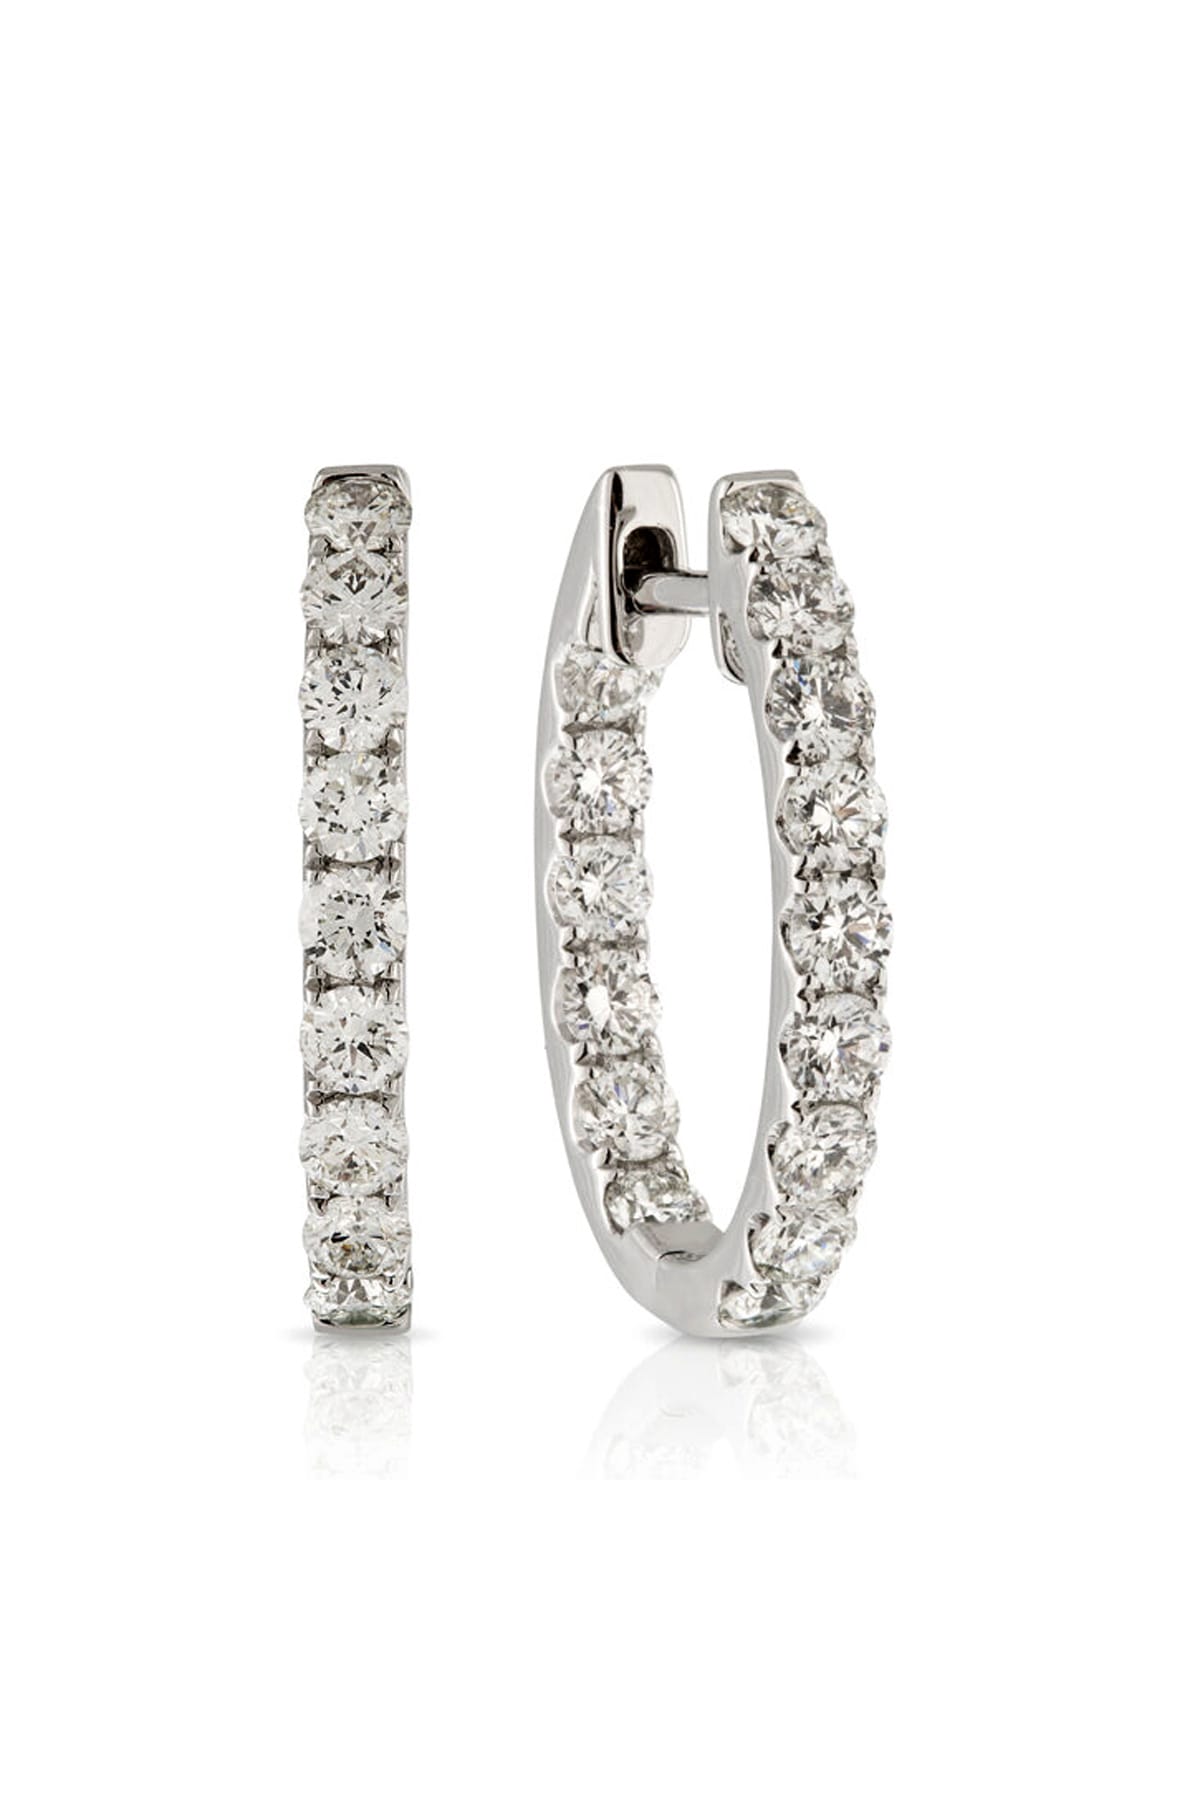 18 Carat White Gold Claw Set Day Night Diamond Earrings available at LeGassick Diamonds and Jewellery Gold Coast, Australia